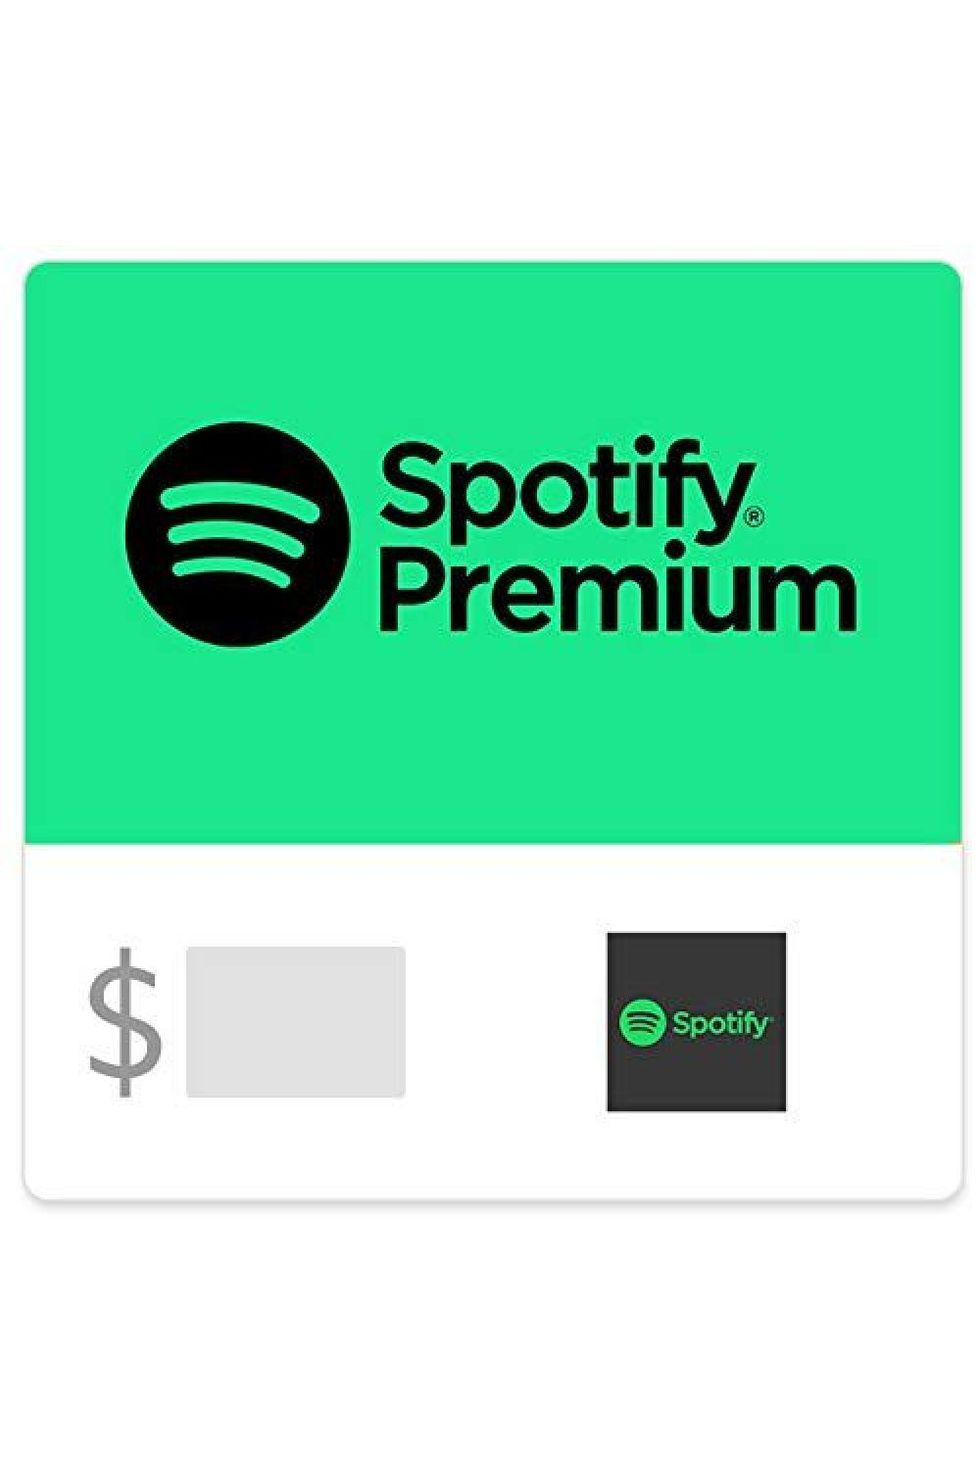 5. How to redeem a Spotify gift card - GiftCards Hub